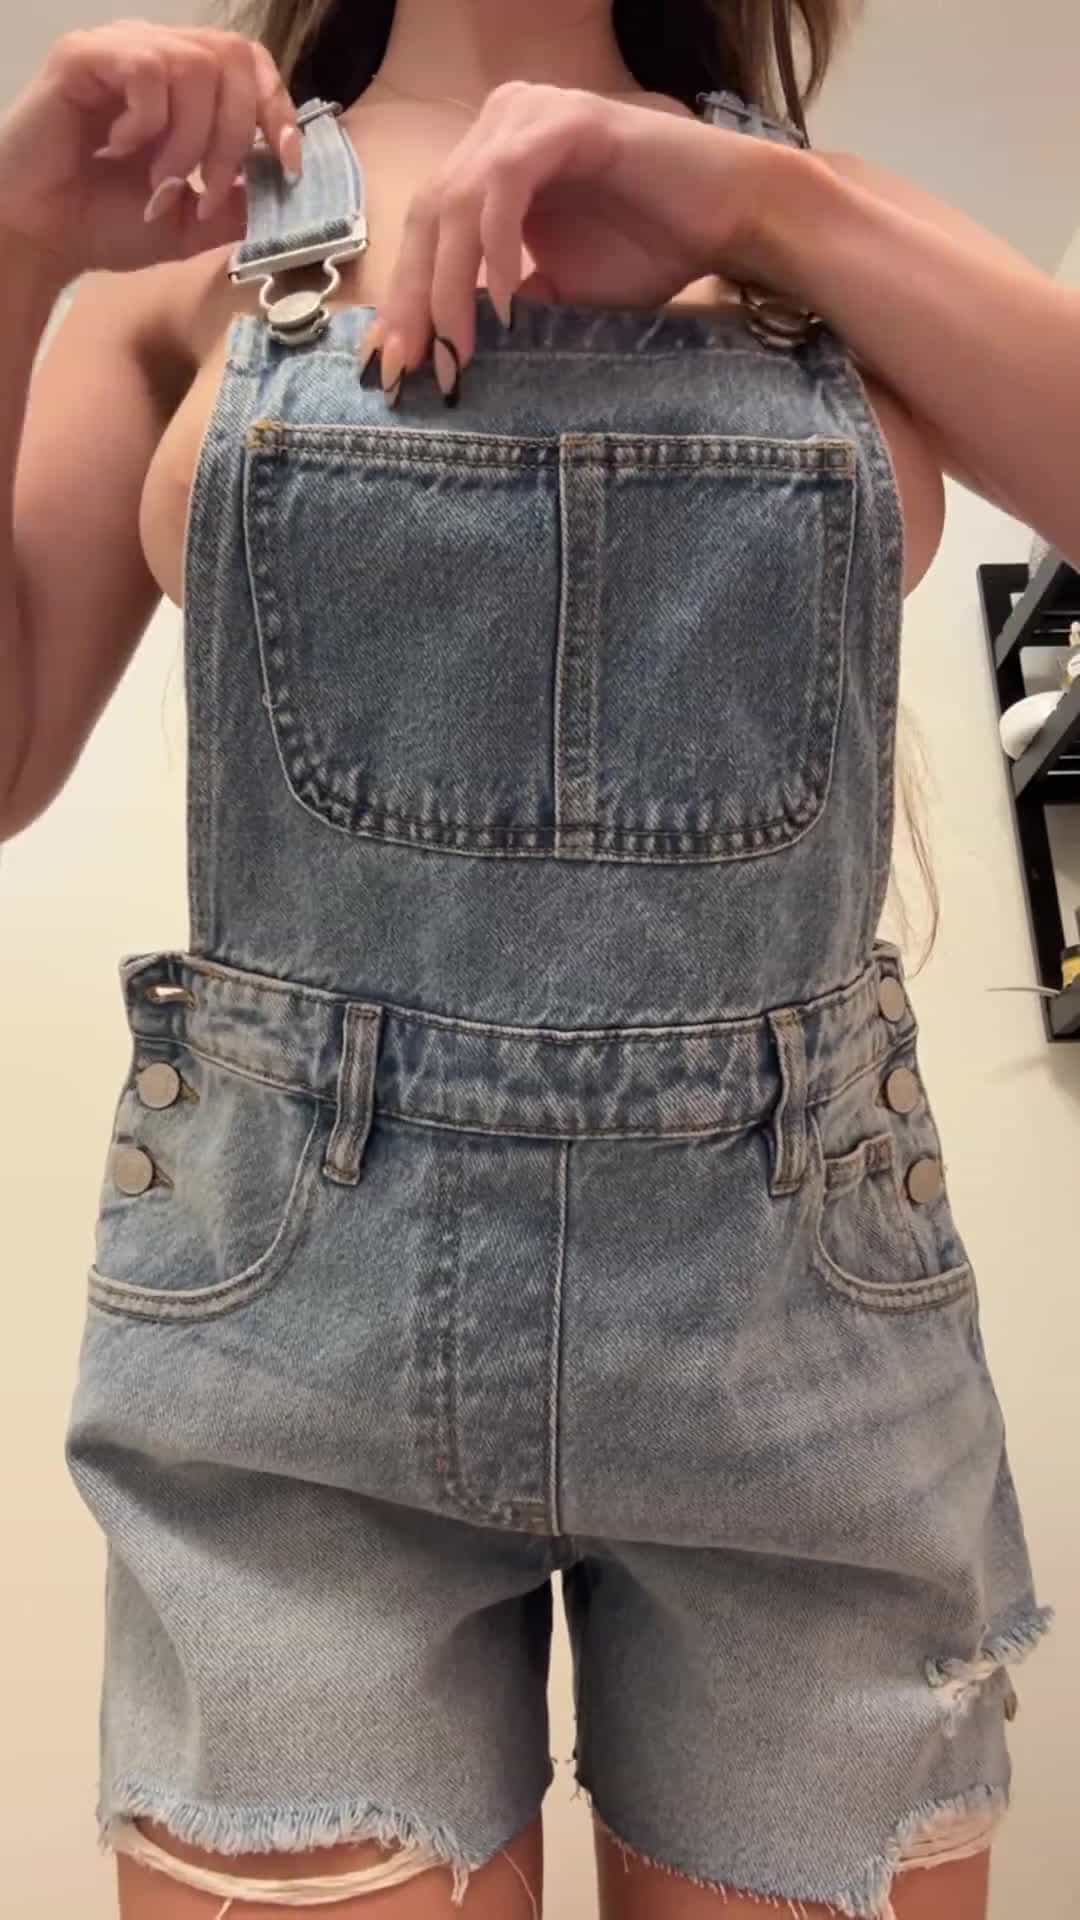 I think it’s safe to say.. my big tits do NOT fit very well in overalls🤪🤪 [reveal]